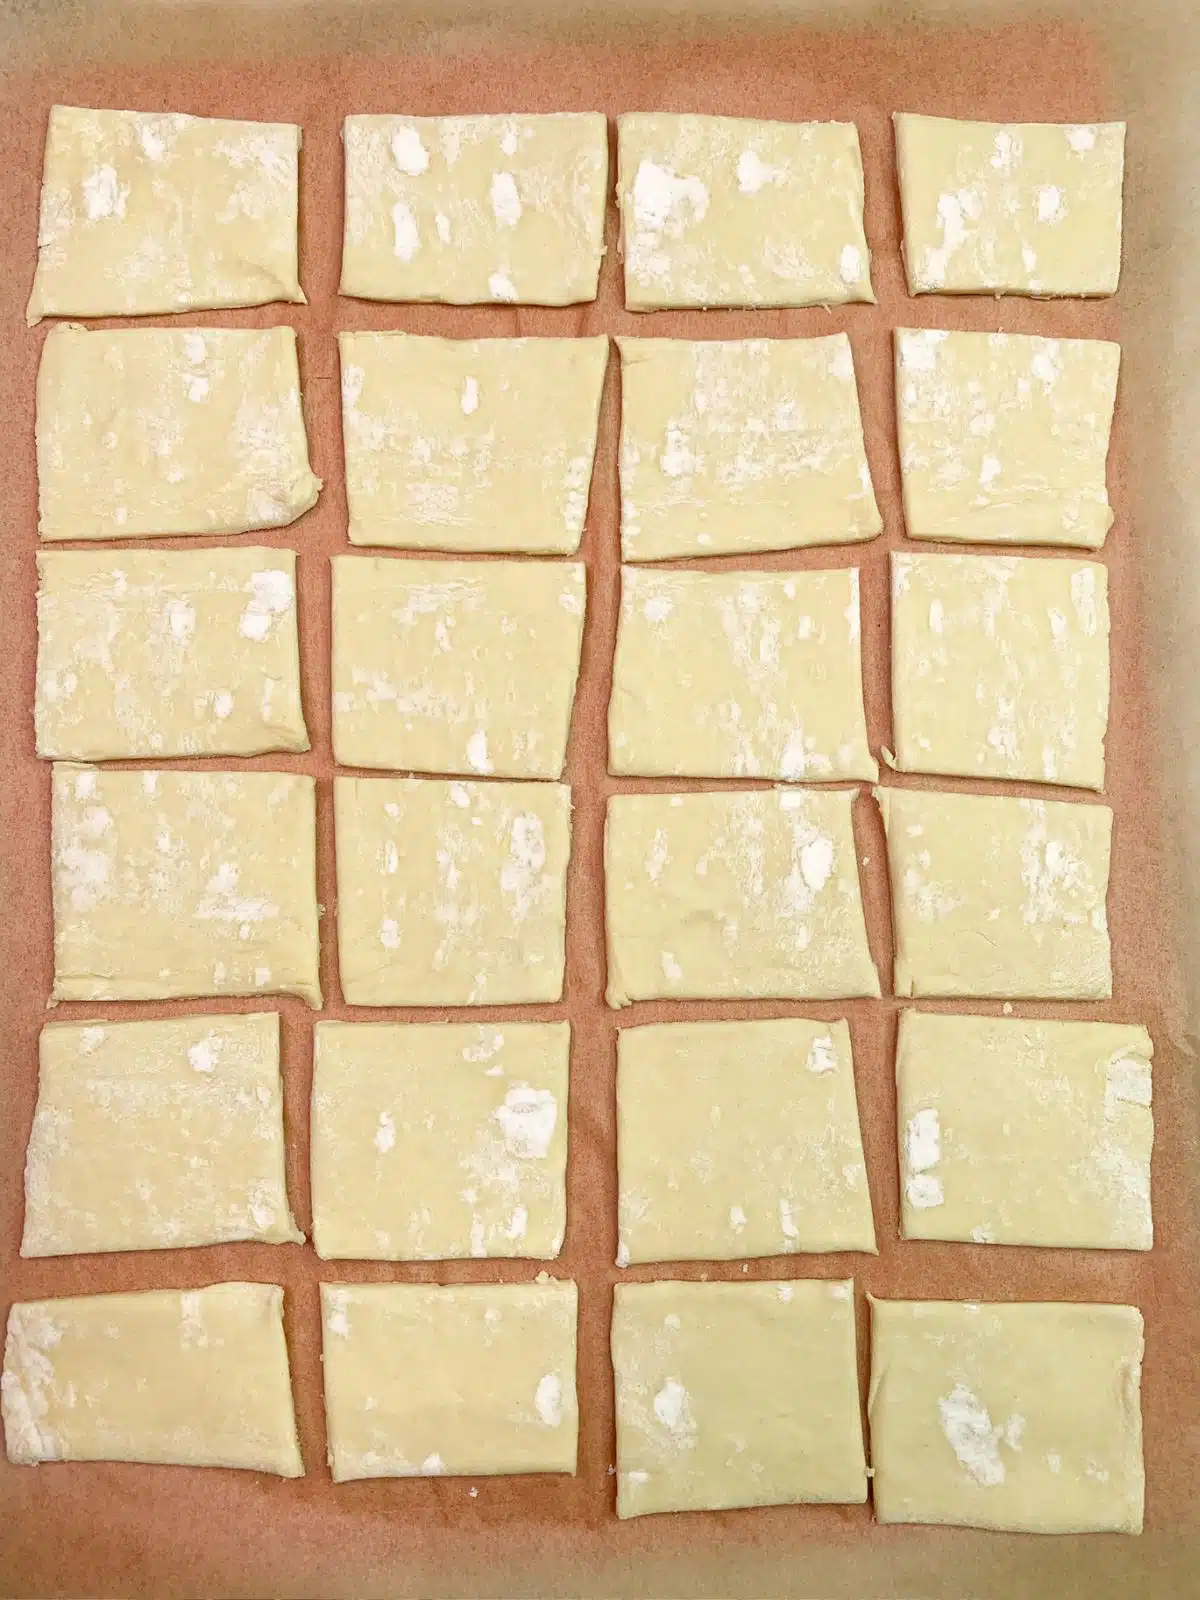 24 squares of puff pastry dough.